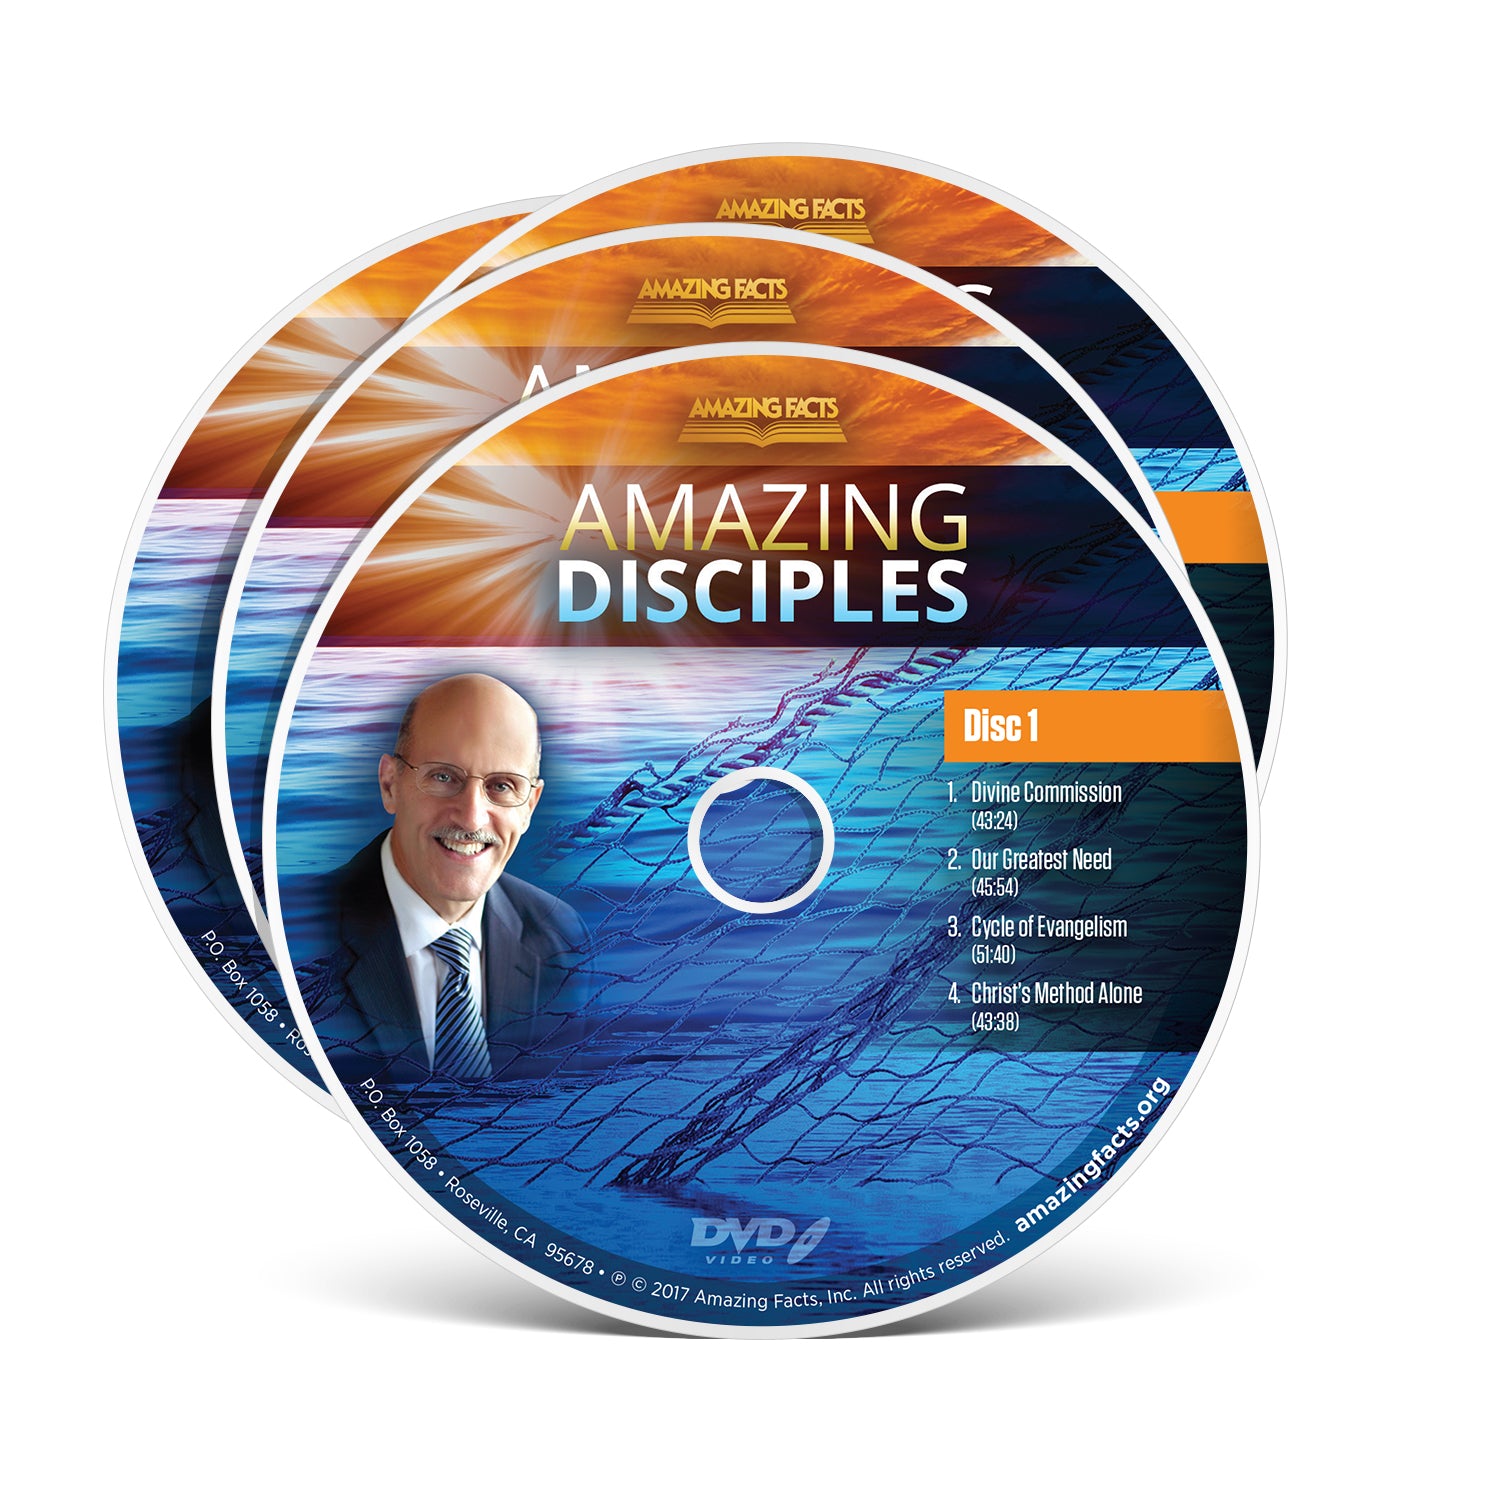 Amazing Disciples DVD set by Amazing Facts